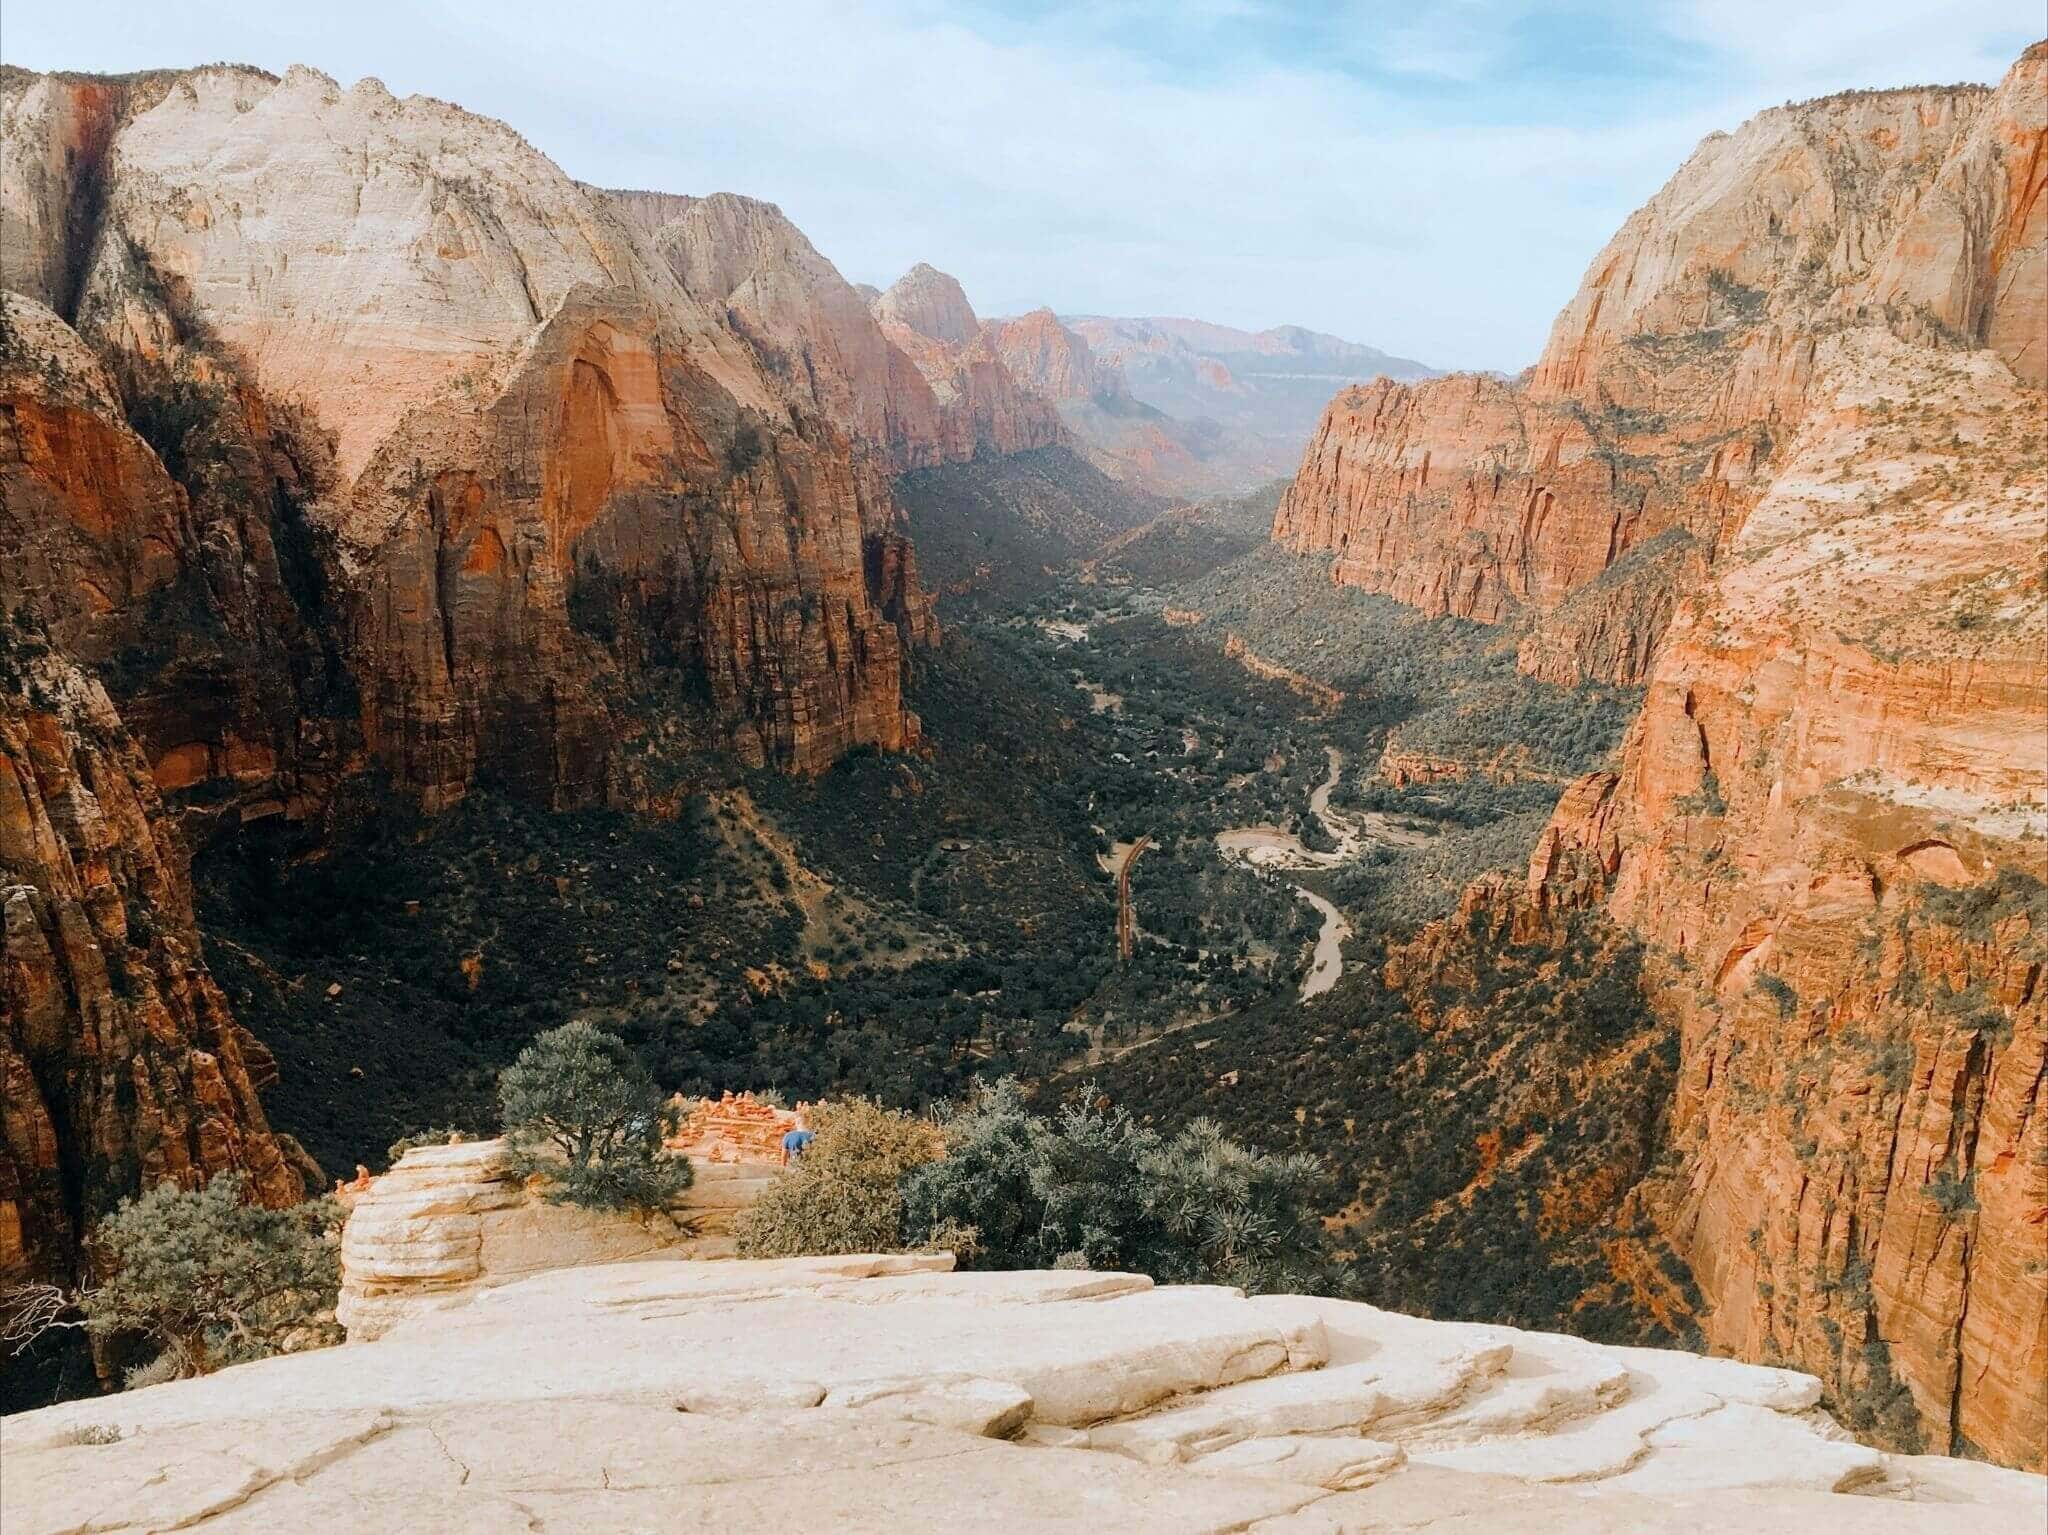 view of a sunny morning sunrise over angels landing in zion national park utah